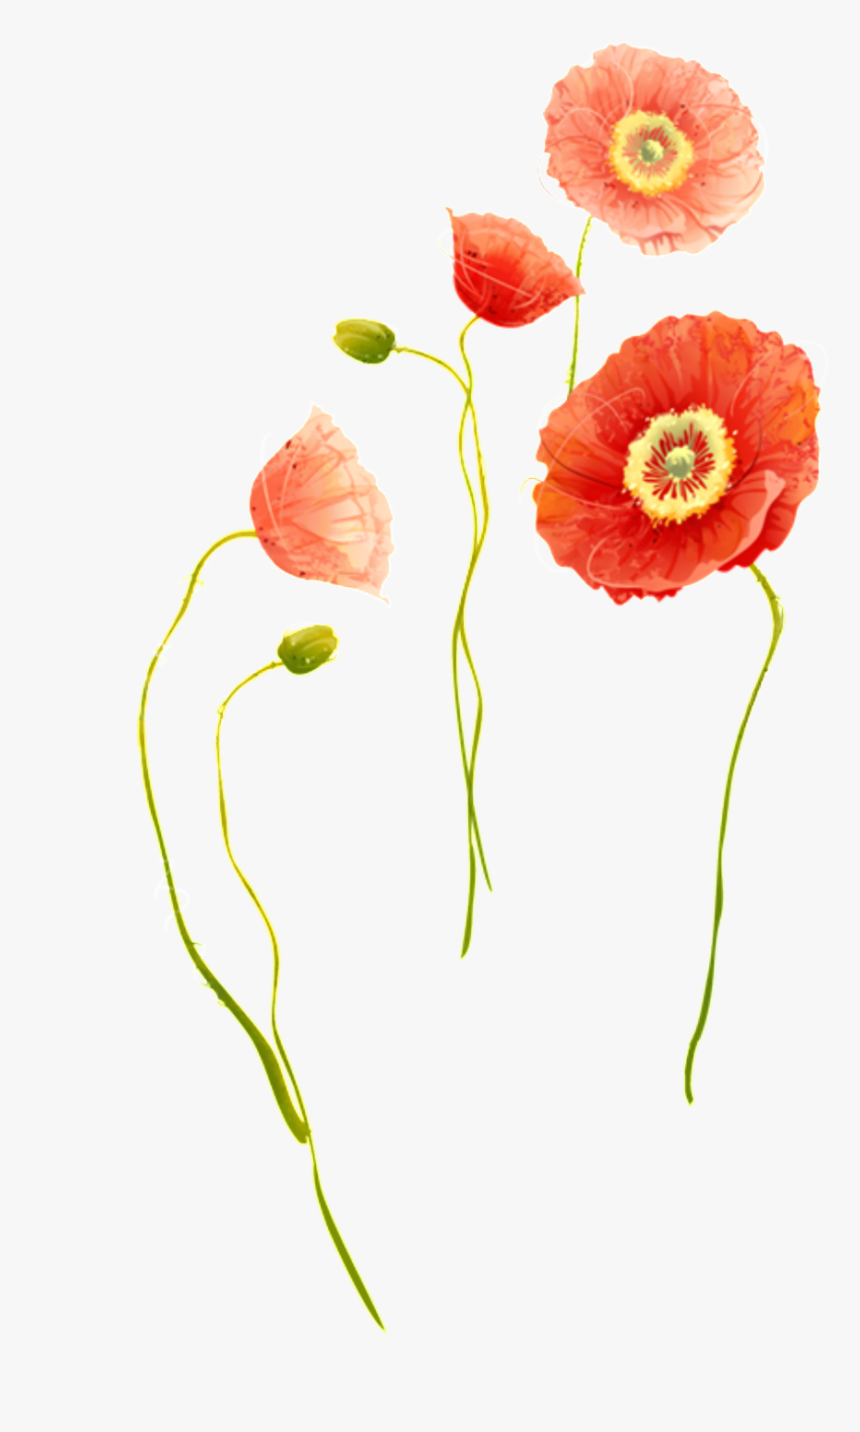 Exquisite Chrysanthemum Decorative Elements - Corn Poppy, HD Png Download, Free Download